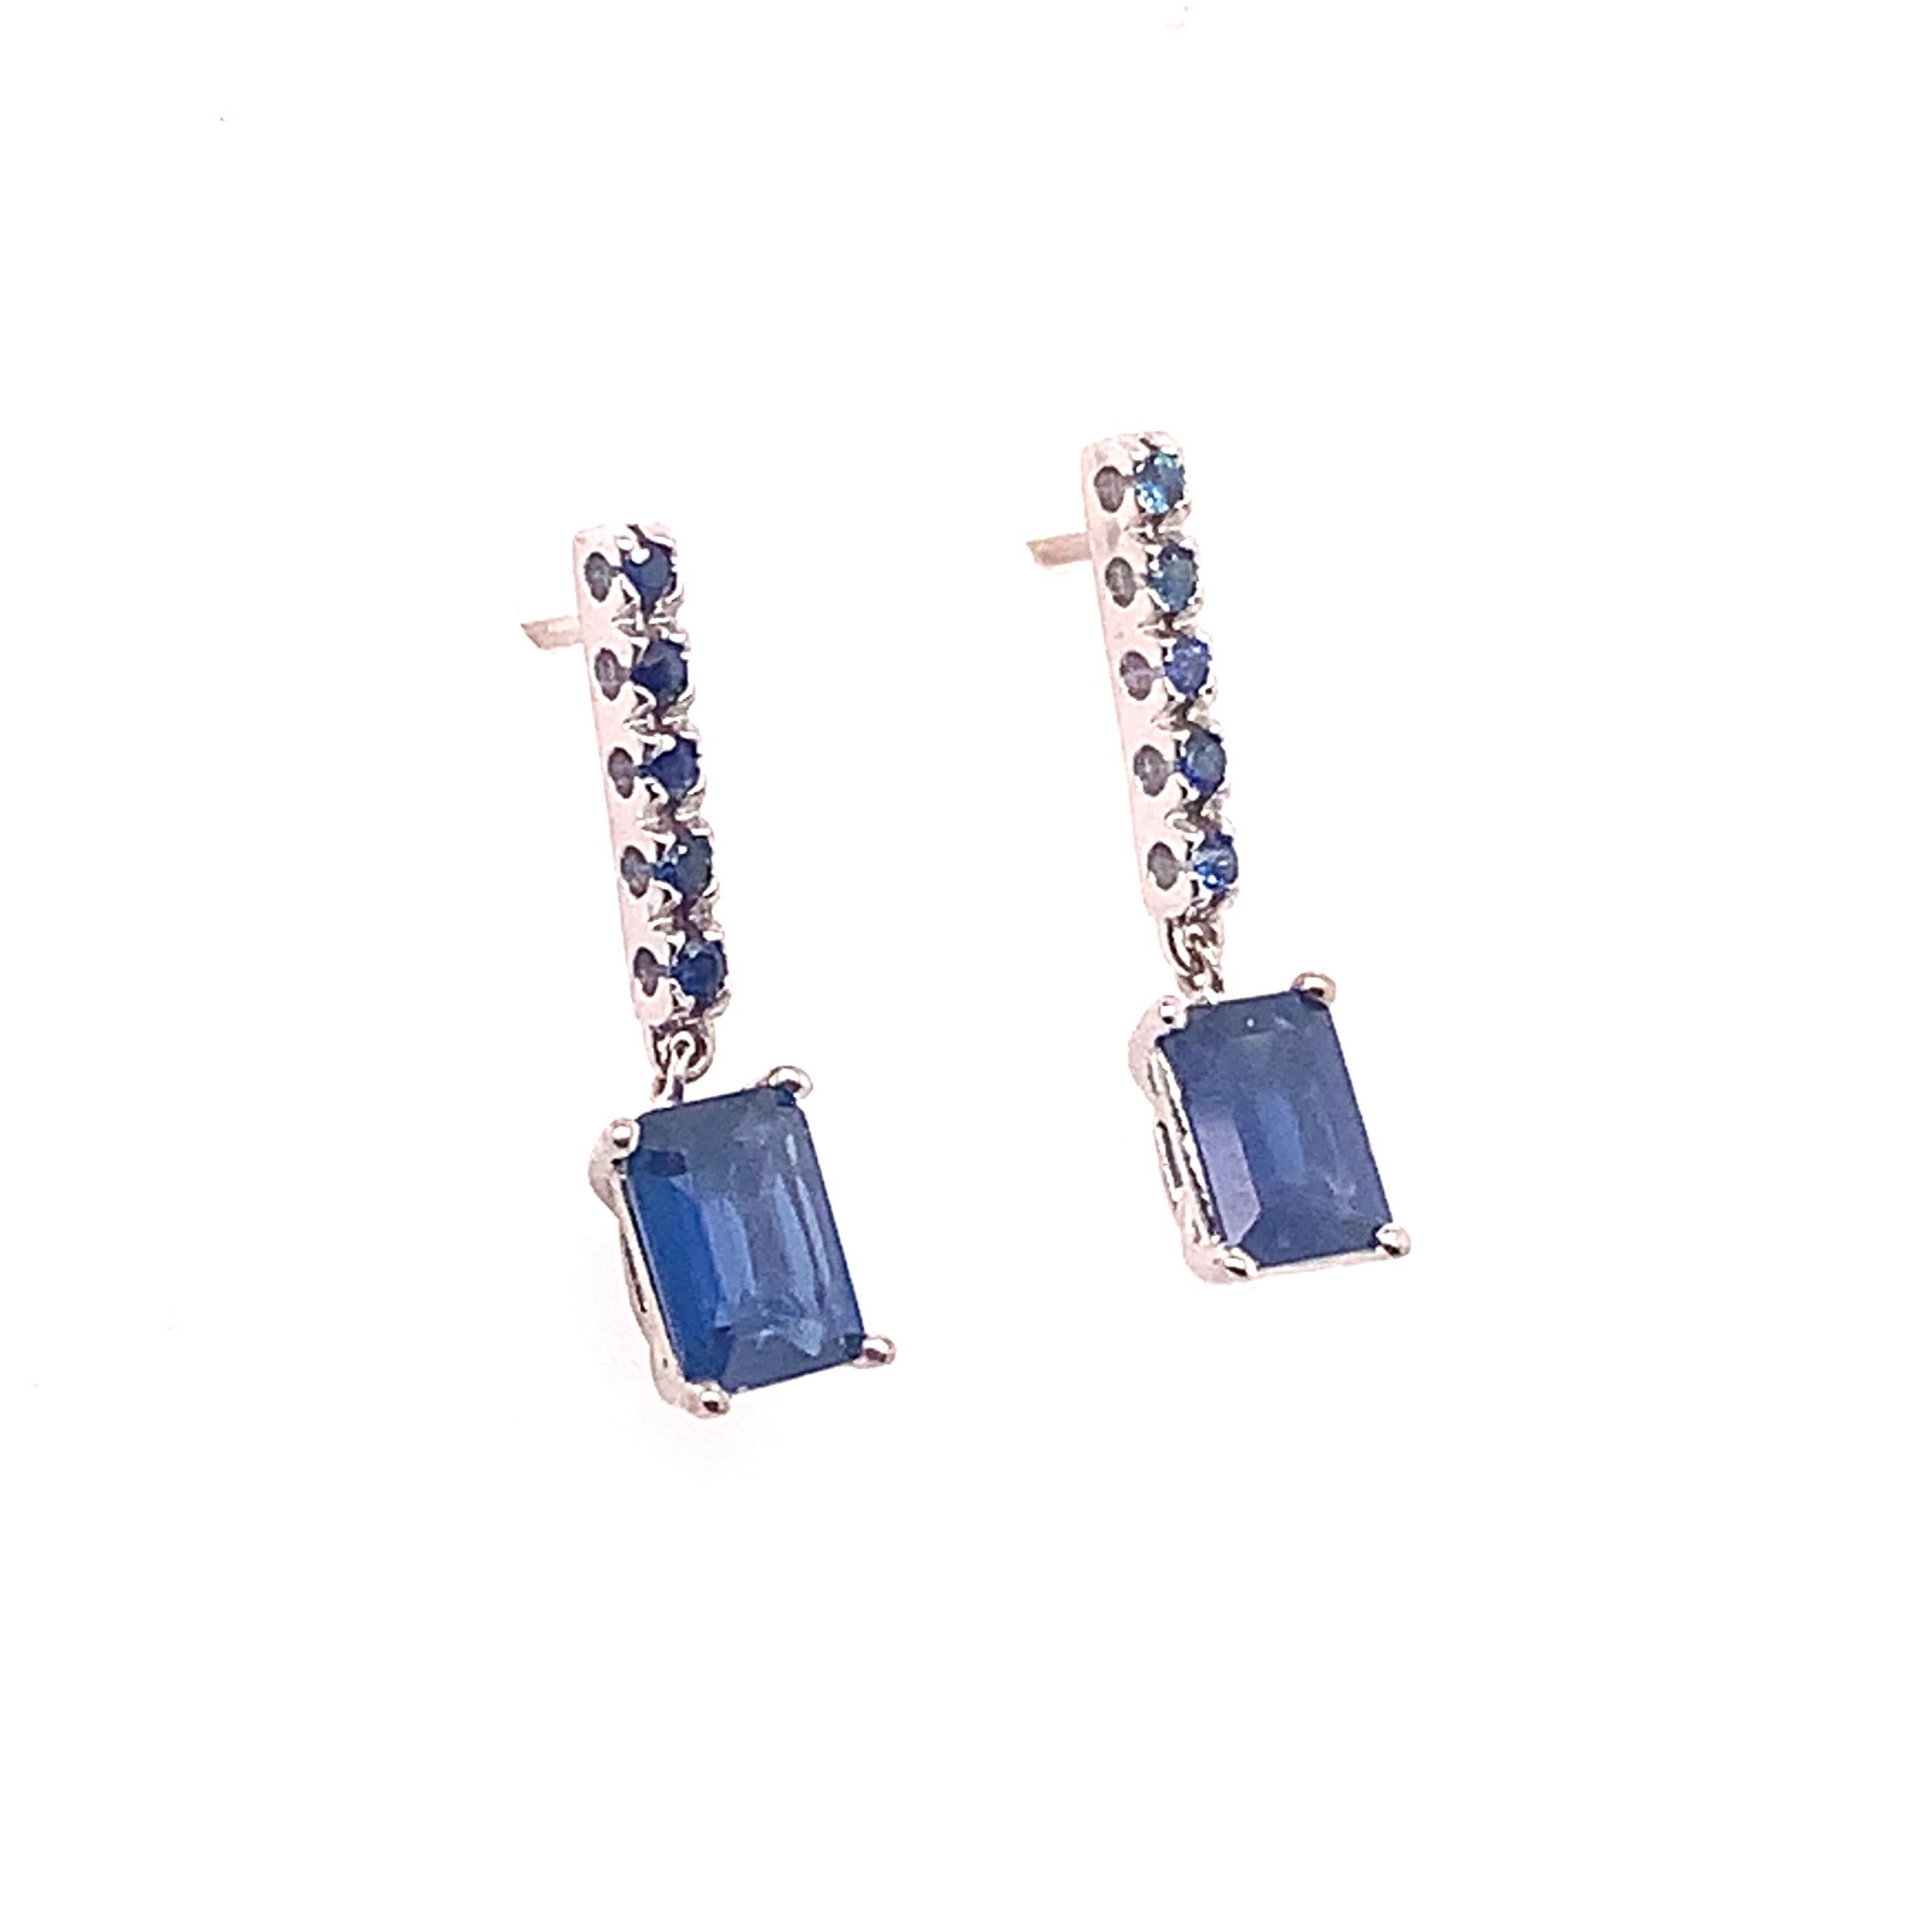 Natural Finely Faceted Quality Sapphire Dangle Earrings 14k Gold 2.01 TCW Certified $3,950 018682

This is a Unique Custom Made Glamorous Piece of Jewelry!

Nothing says, 